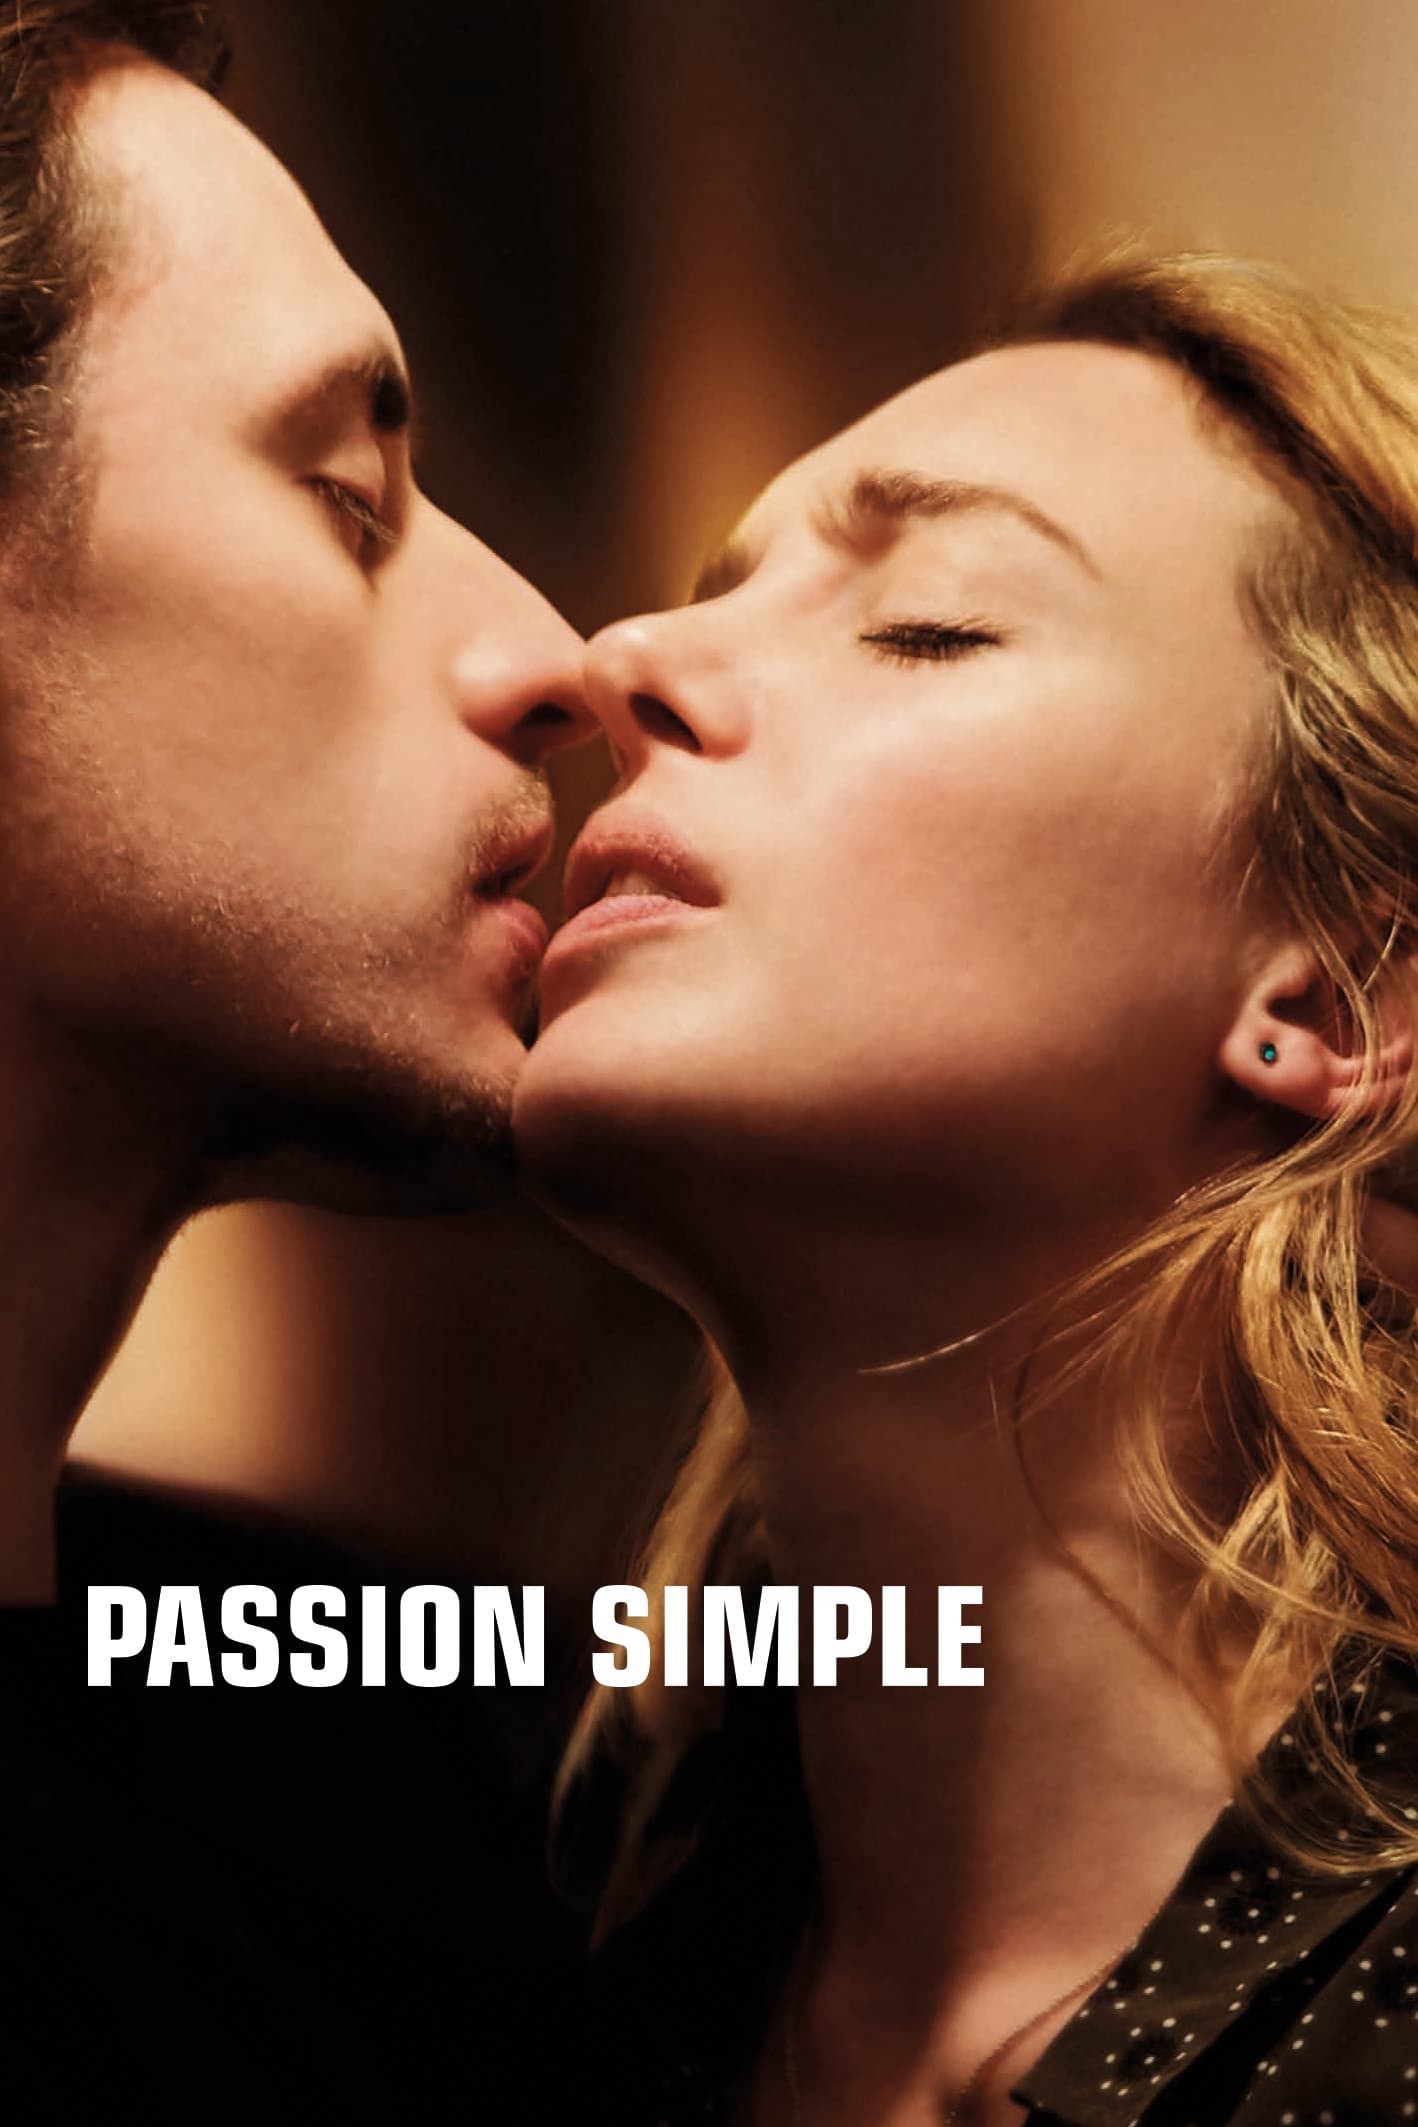 Passion simple - Passion simple (2021)